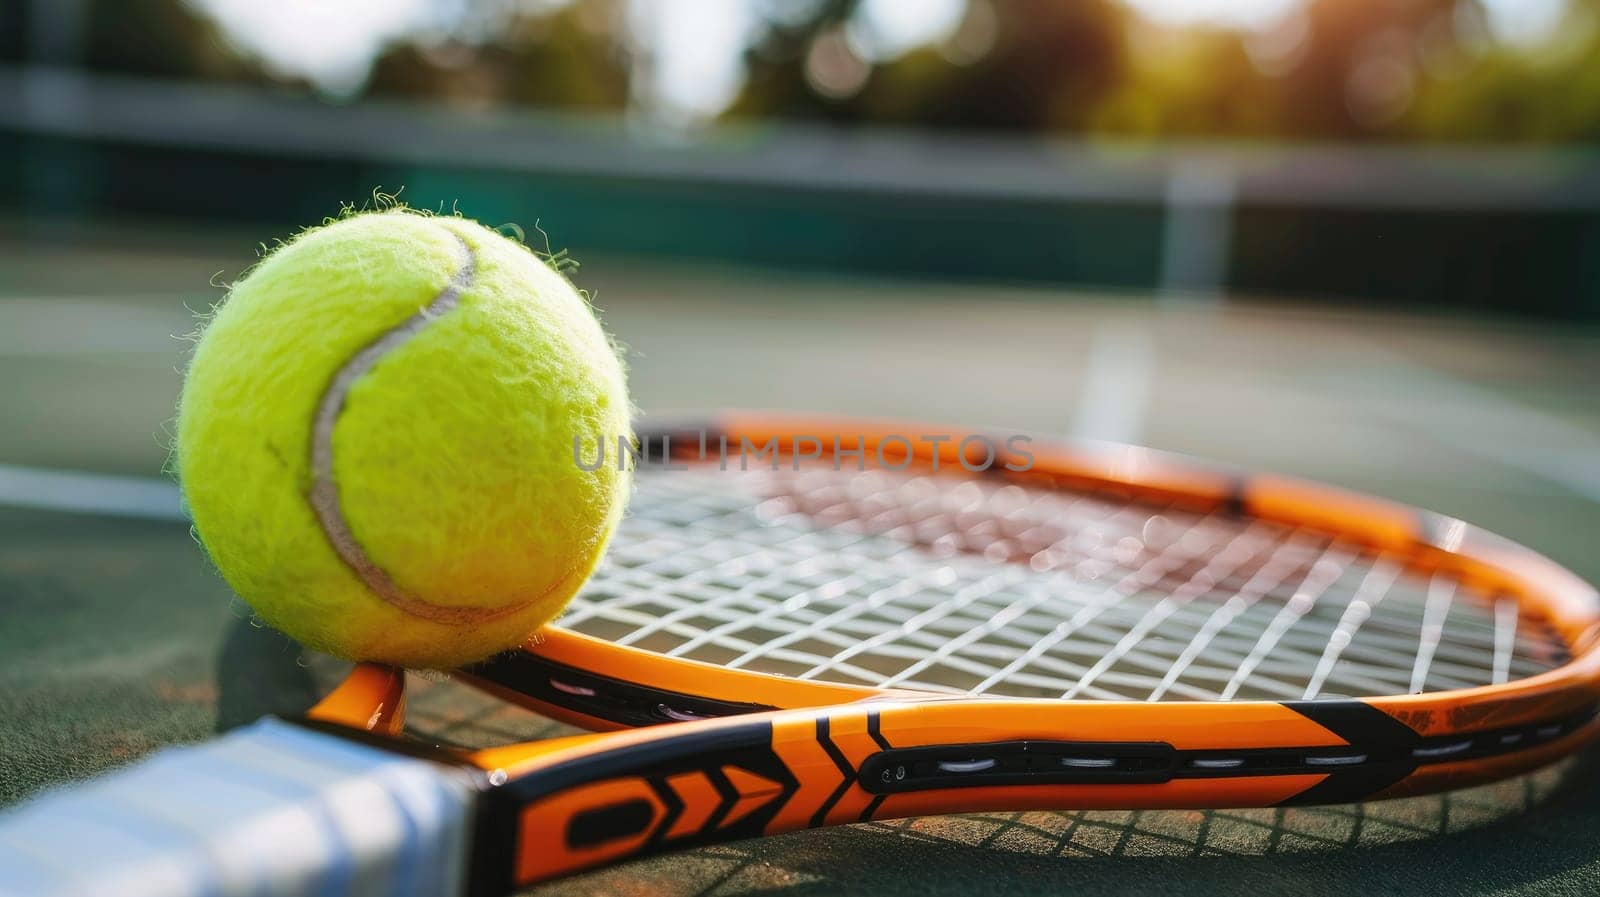 Tennis racket and tennis ball on tennis clay court with copy space for text, Sport and healthy lifestyle wallpaper or background.